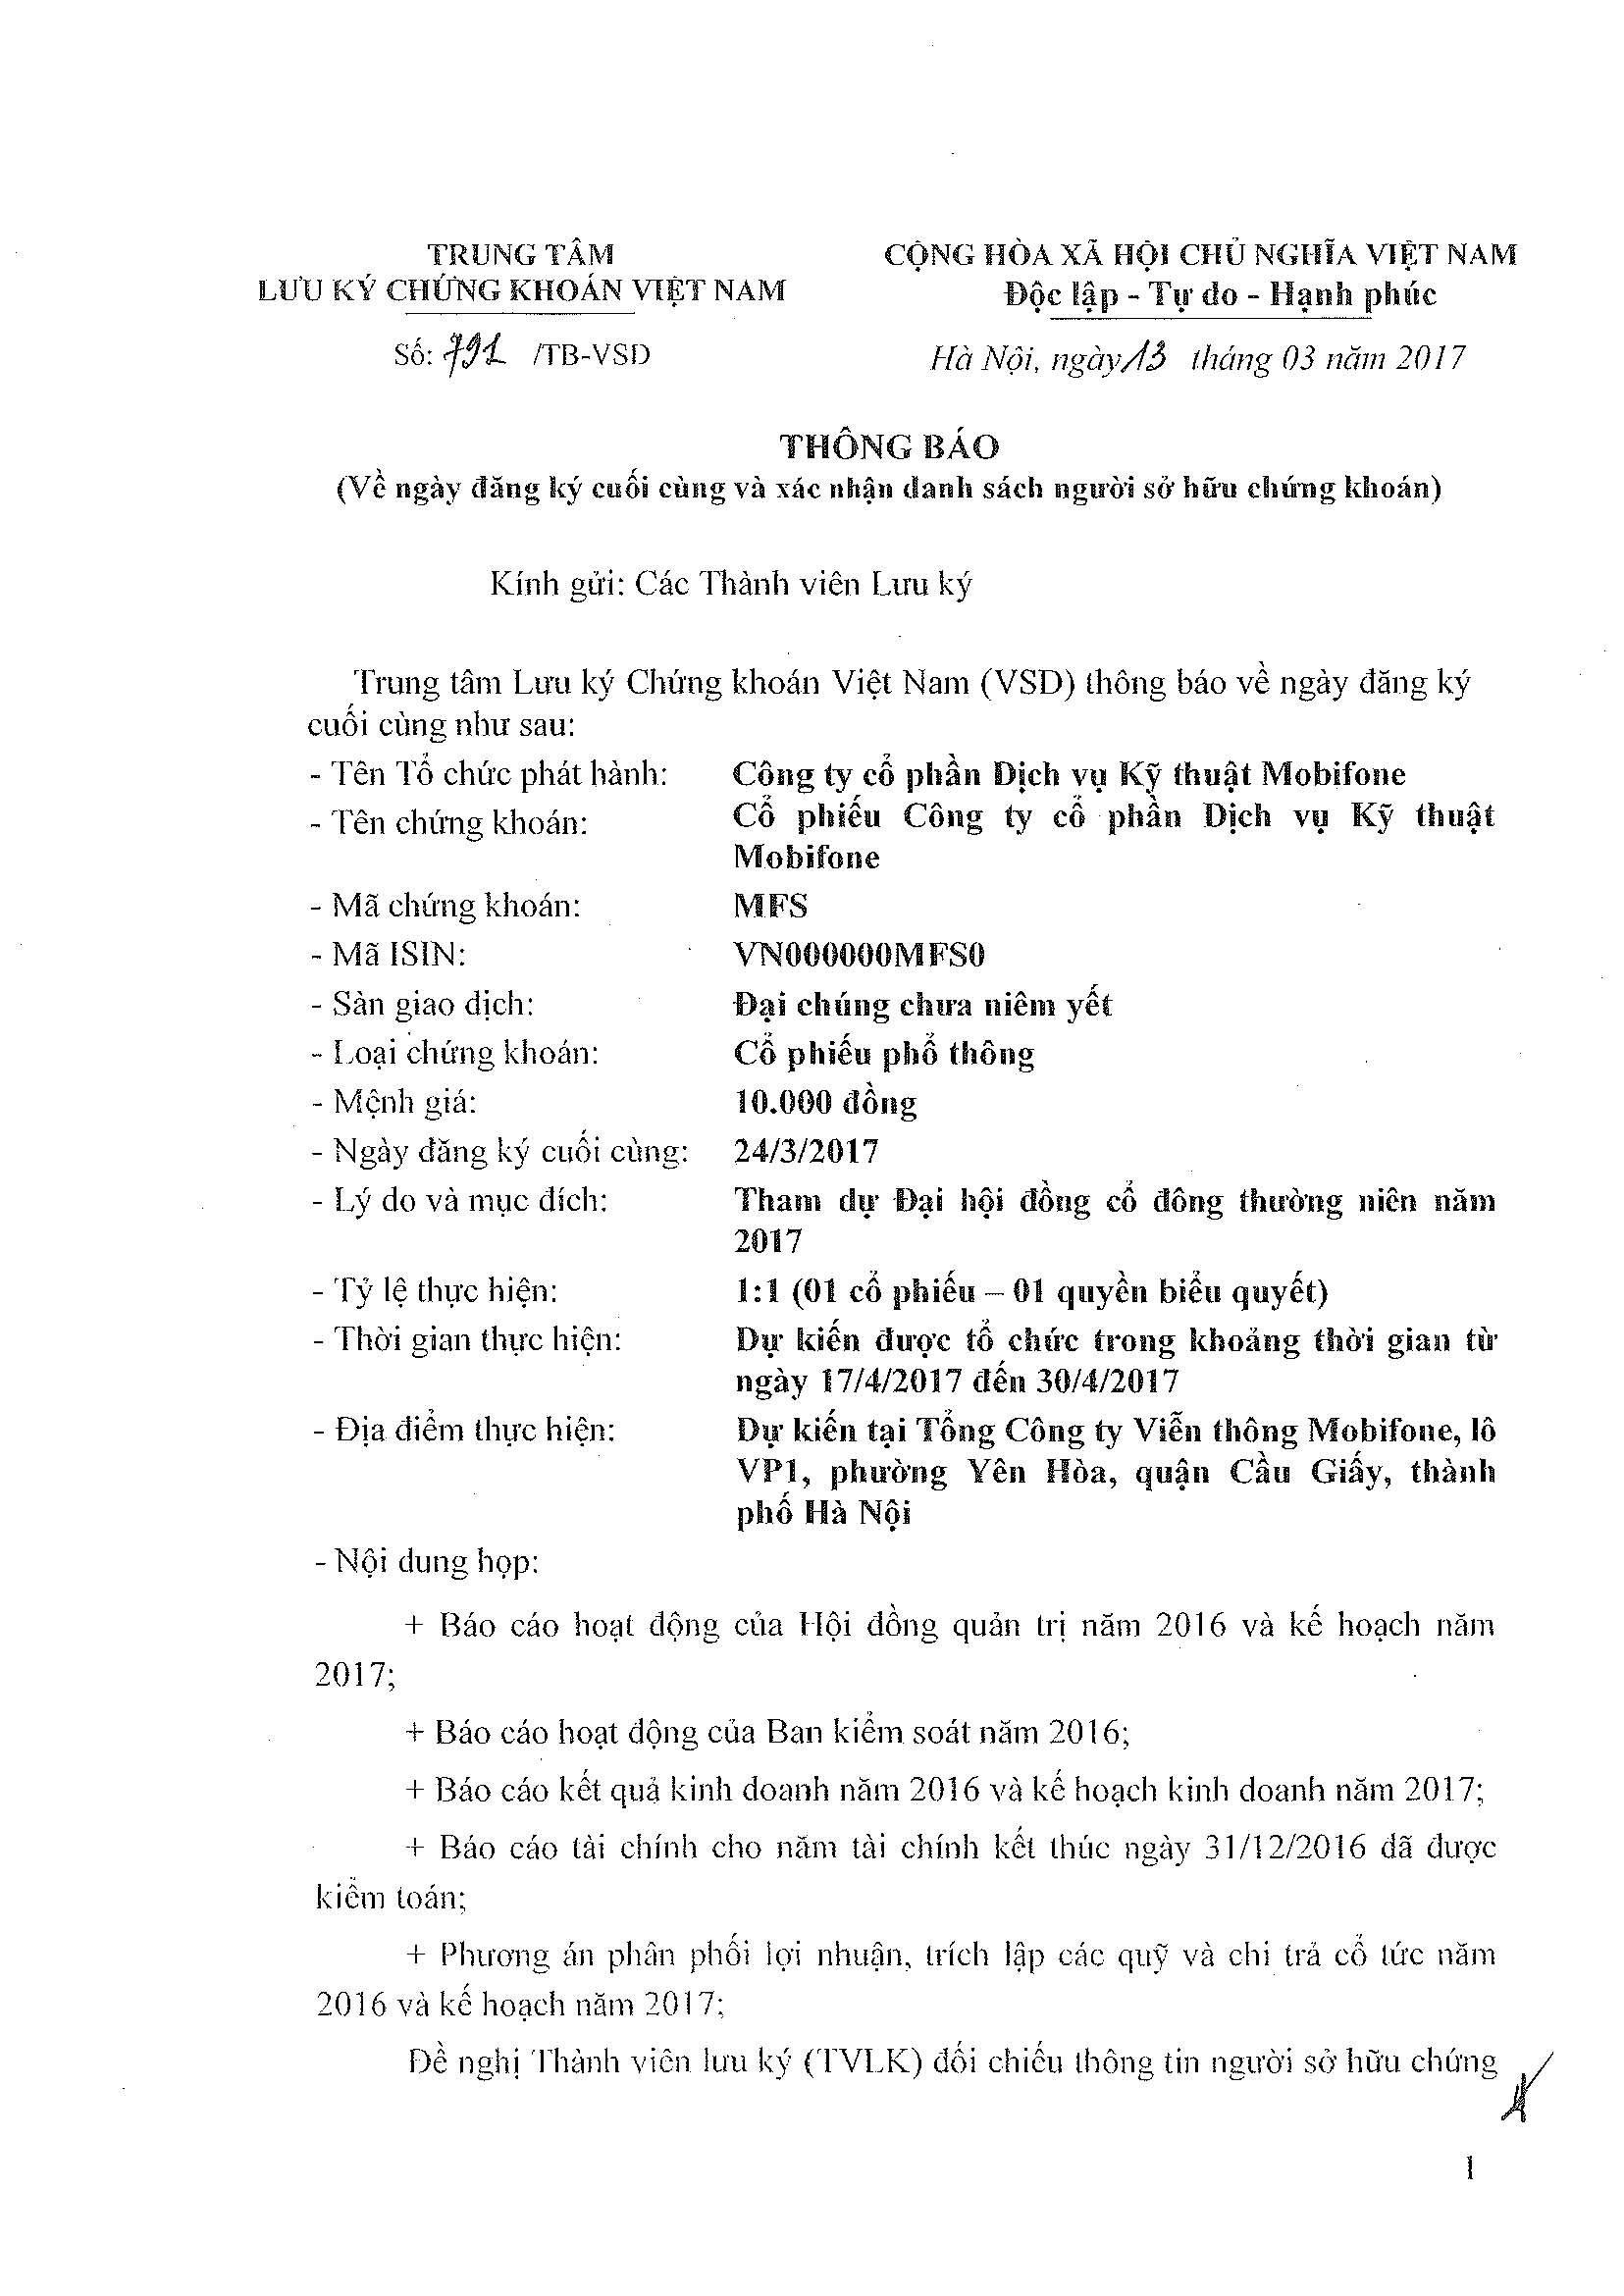 TB 791- Ngay dang ky cuoi cung_Page_1